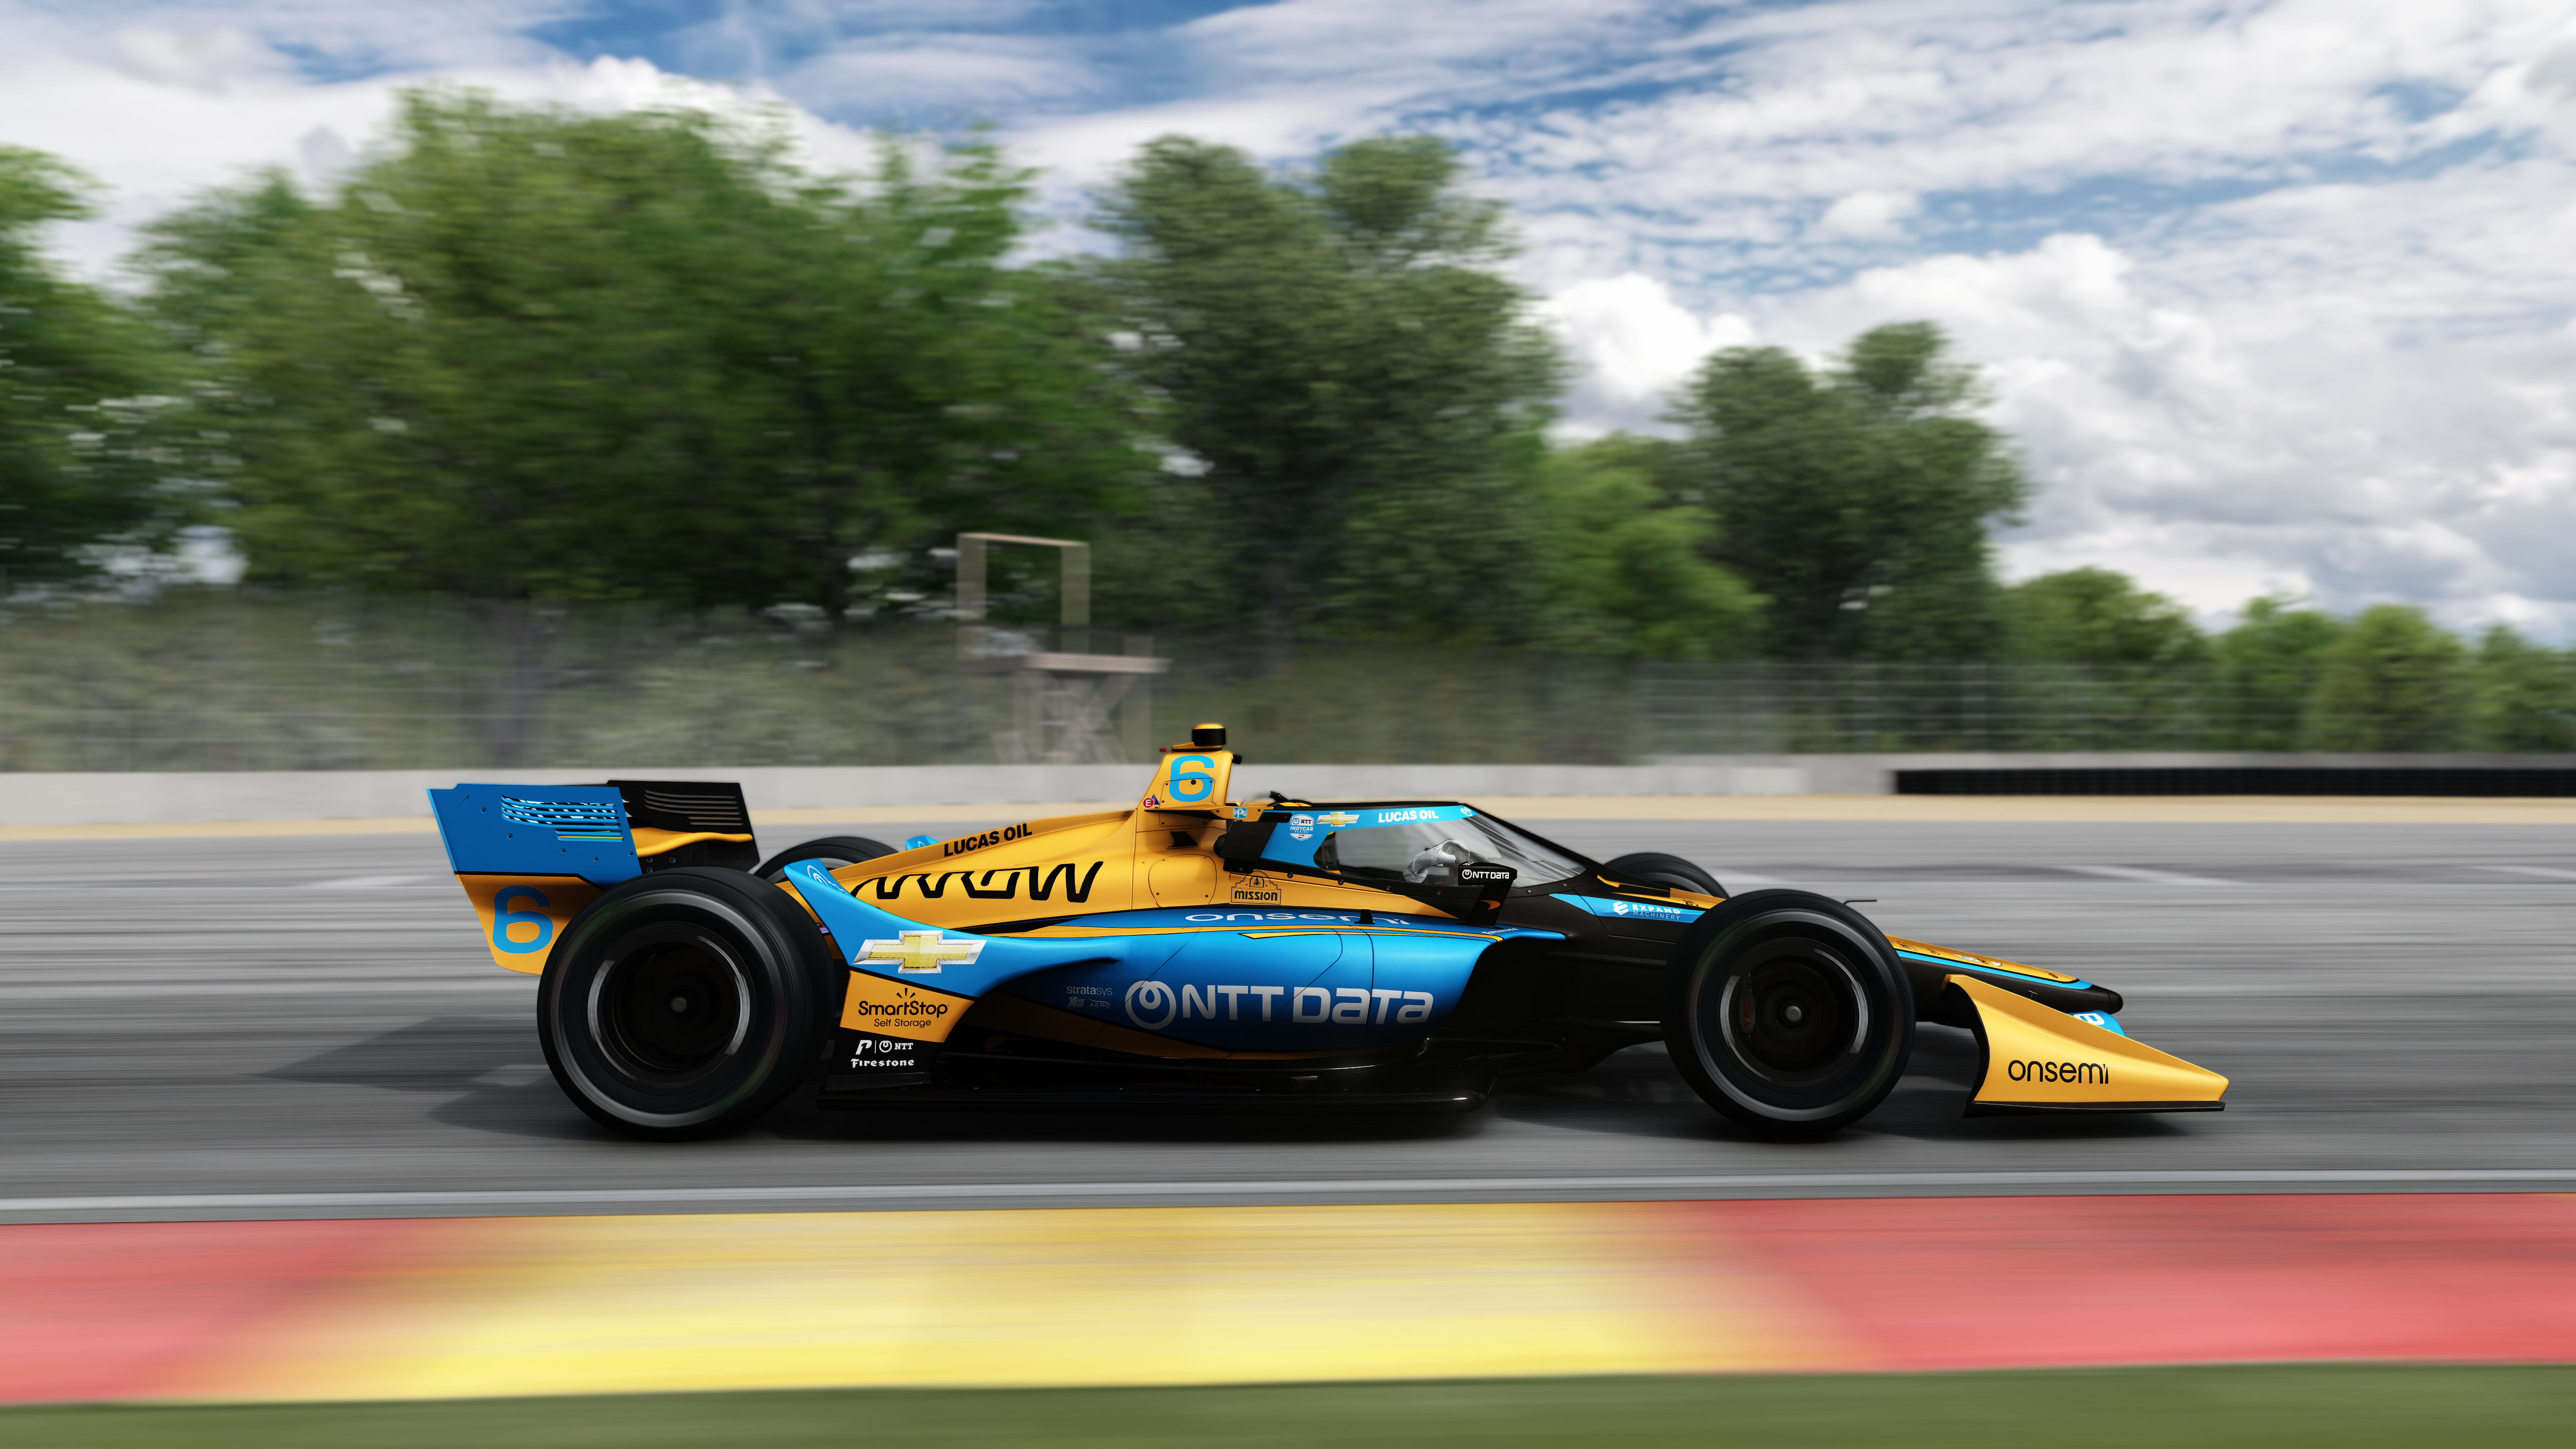 IndyCar Assetto Corsa Side View Video Games Race Cars Car Race Tracks CGi Clouds 5120x2880